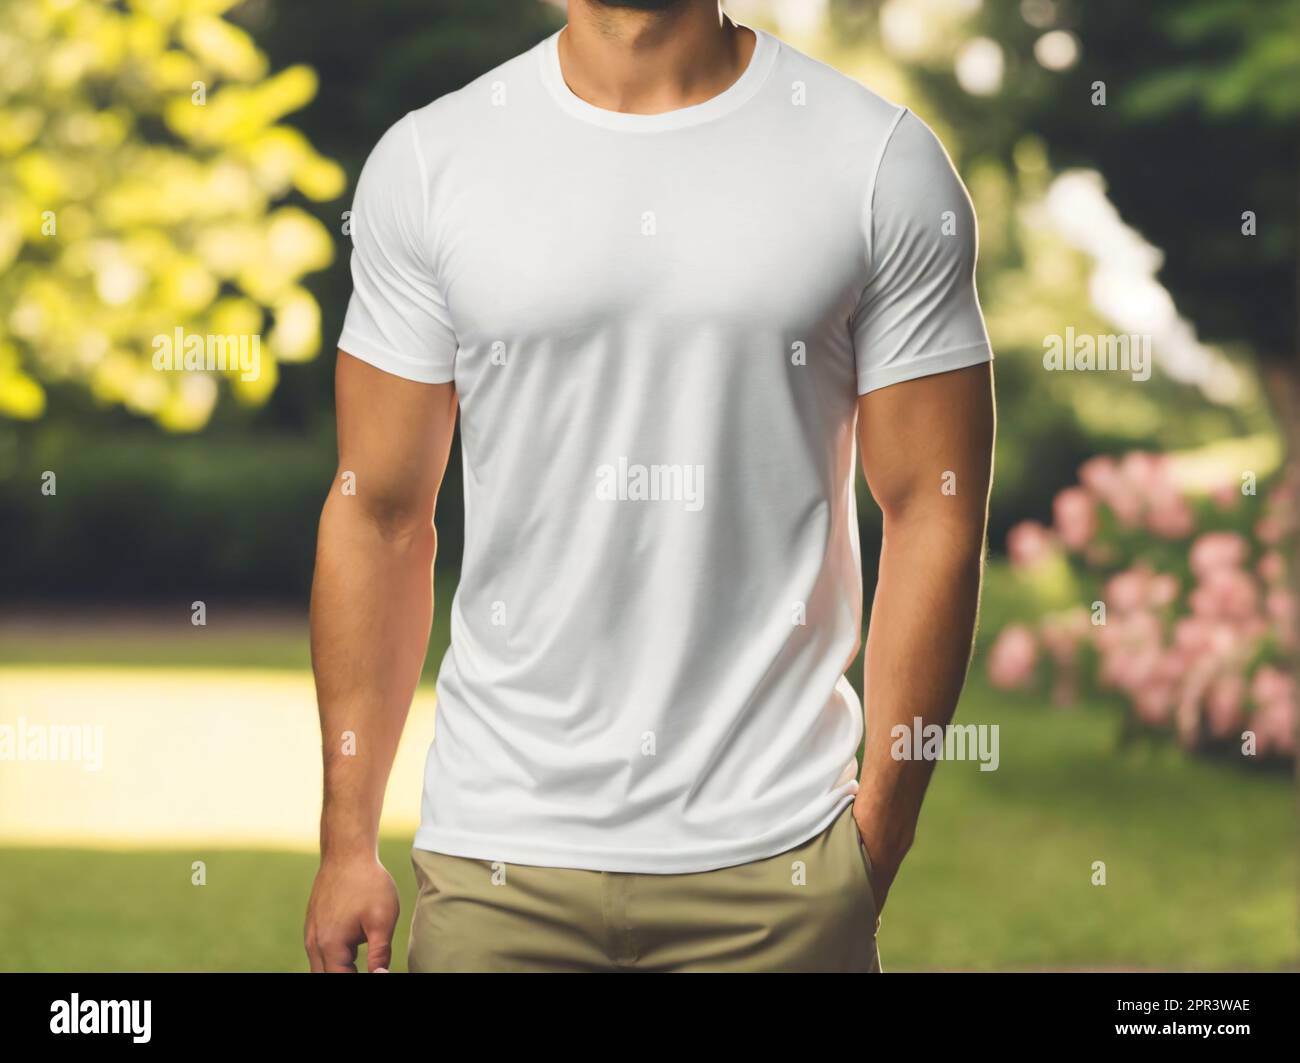 Athletic man wearing a white t-shirt in green garden background. Template or mockup for clothing design Stock Photo